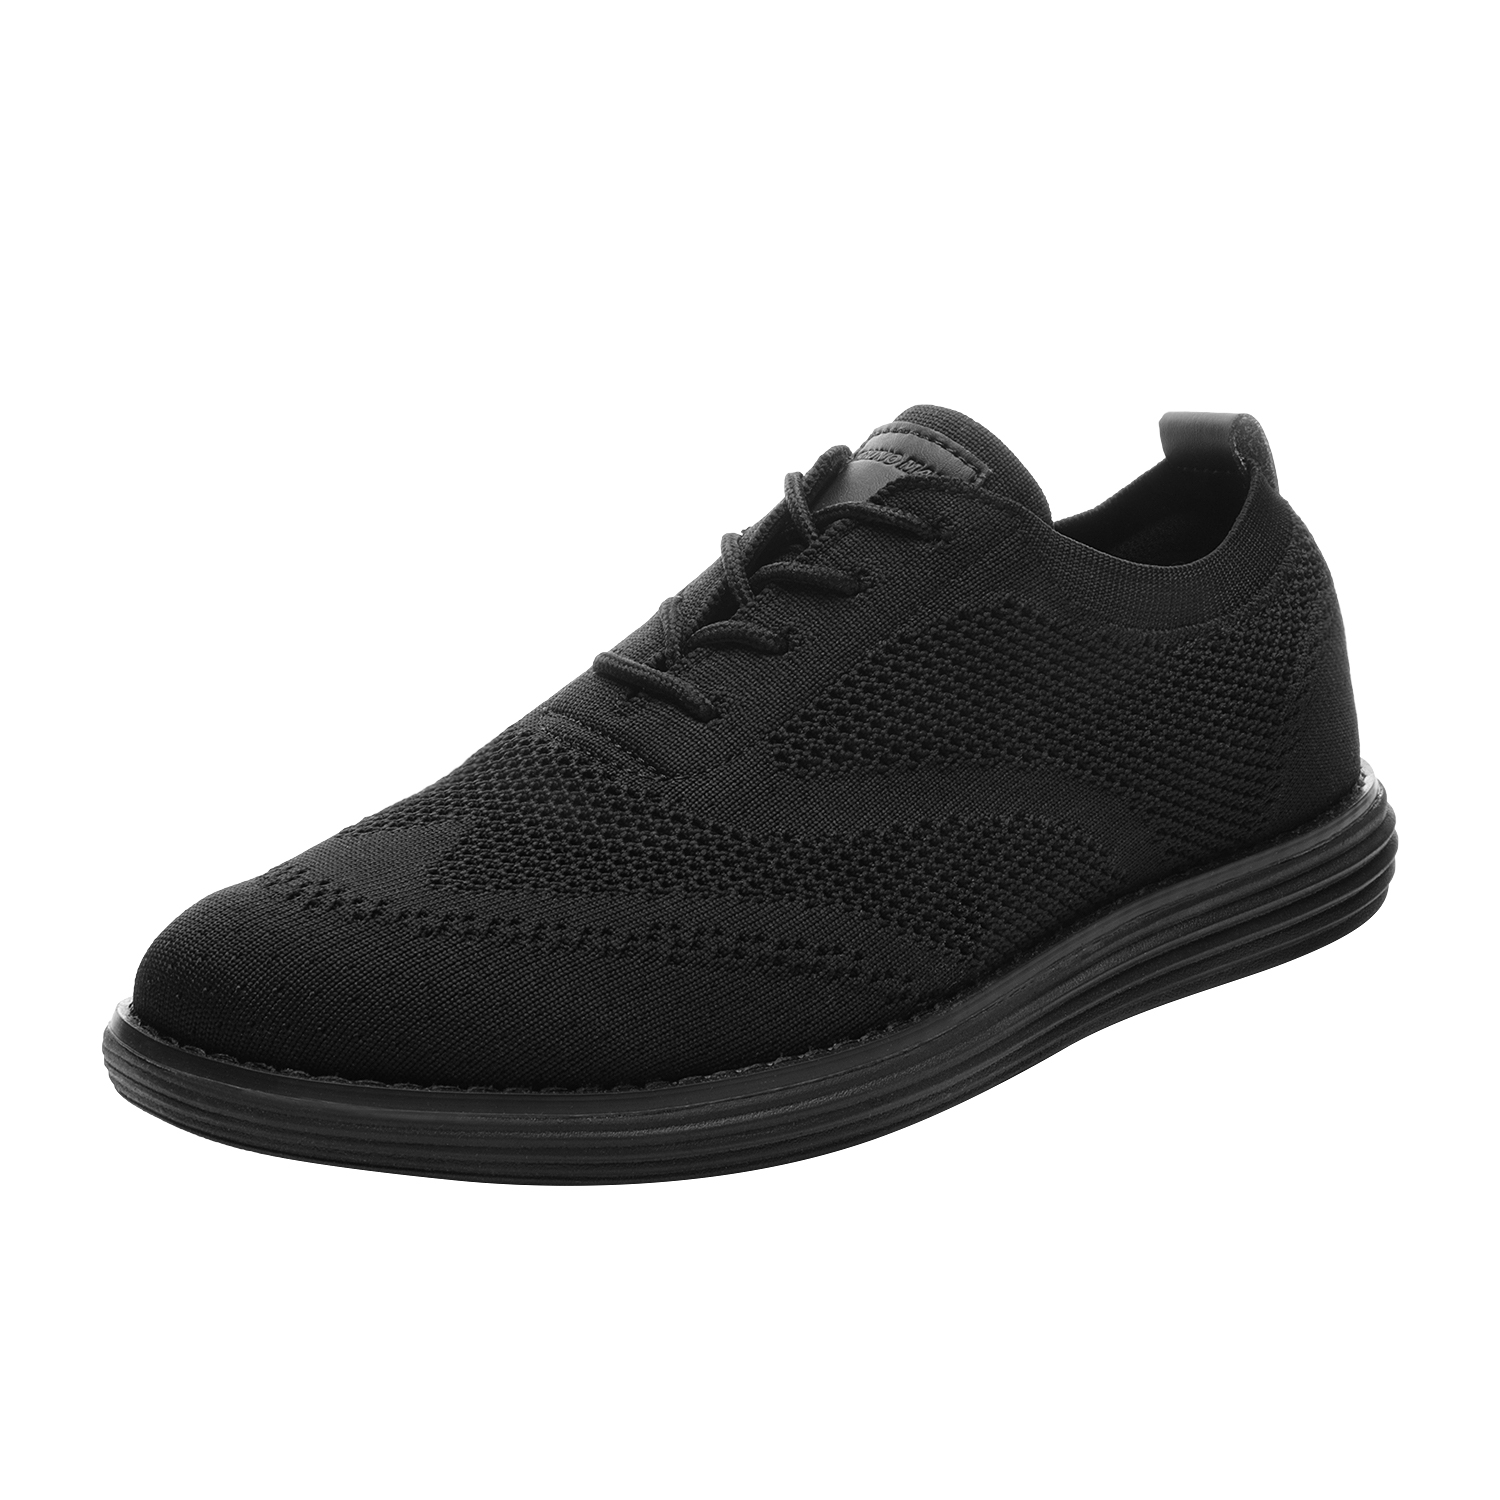 Bruno Marc Mens Fashion Sneakers Lightweight Casual Work Shoes Comfort Tennis Athletic Shoes For Men GRAND-02 ALL/BLACK Size 9 - image 1 of 5